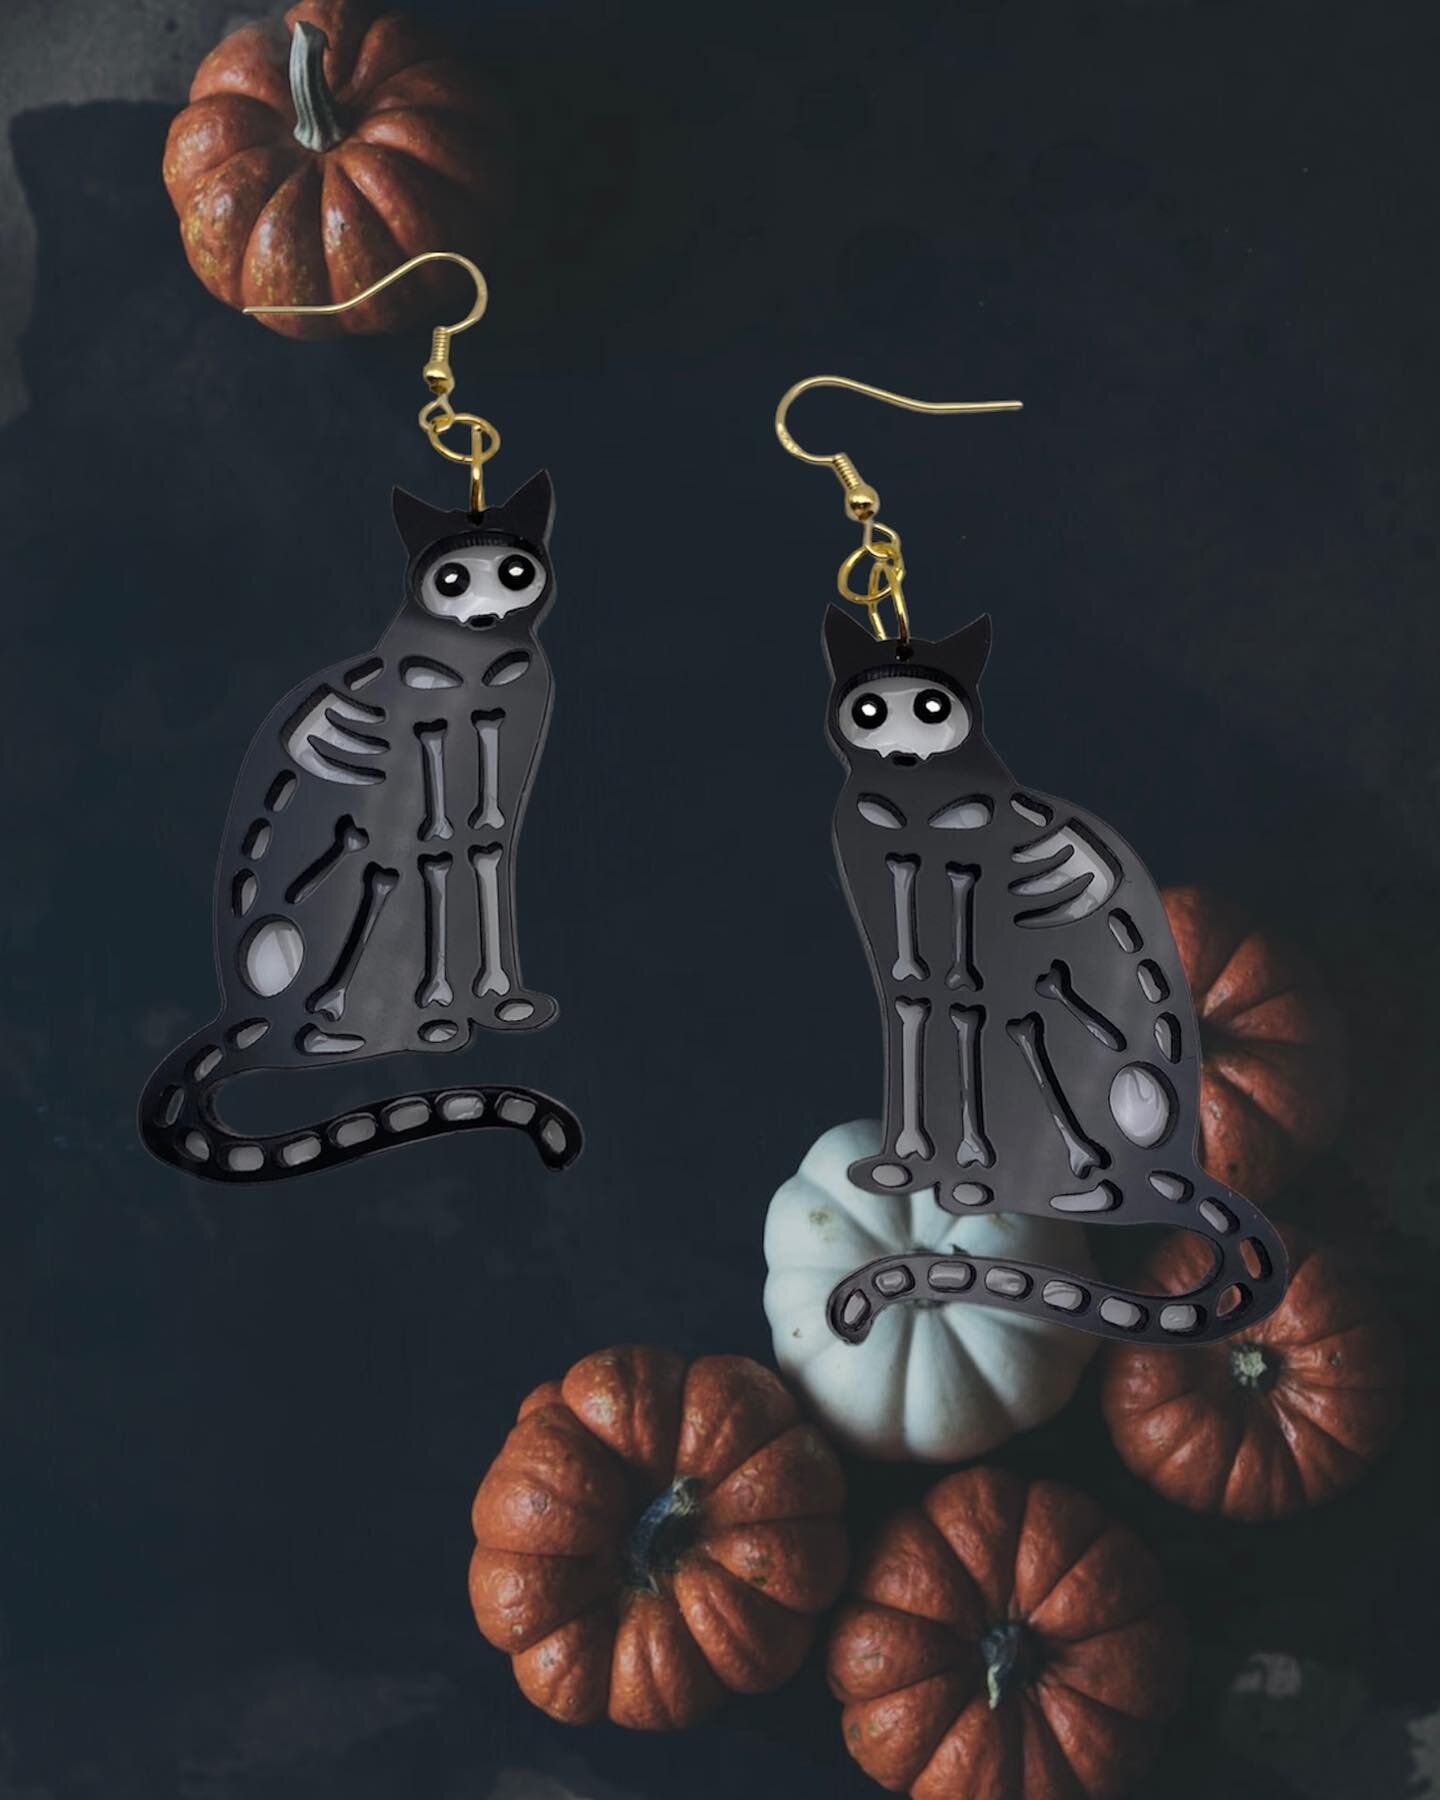 New Halloween Items for Spooky Season! Cat Skeletons &amp; Ghosts!
Shop on Etsy or Libralume.com #halloweencostume #halloweenjewelry #catskeleton